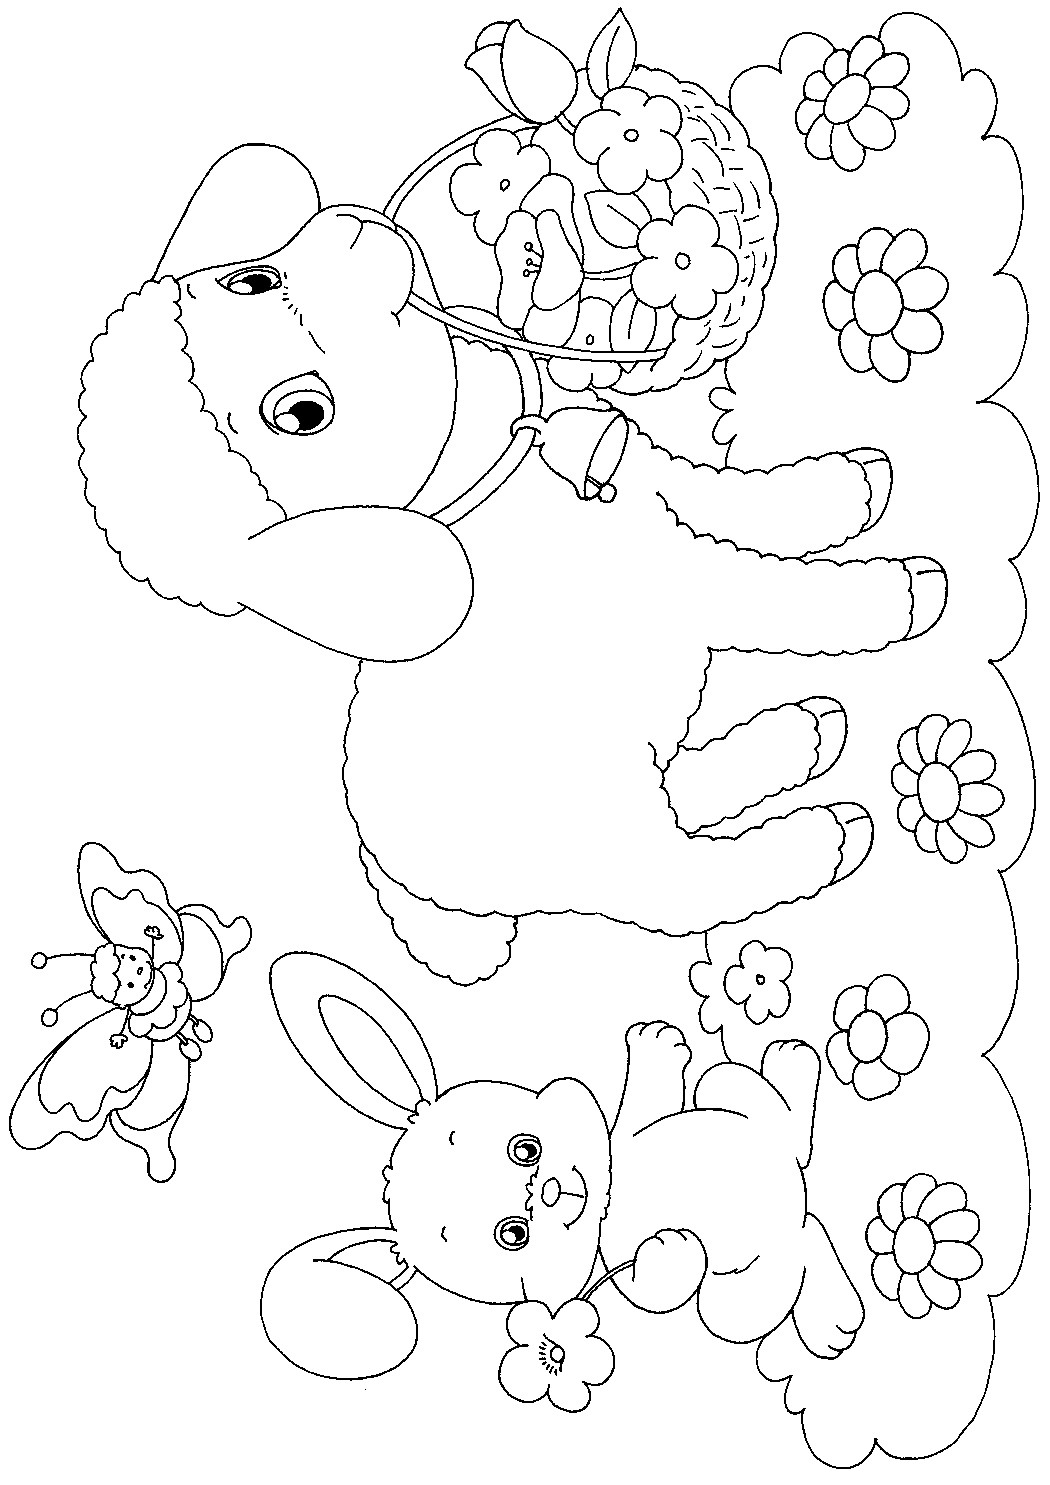 Easter Coloring Sheets For Kids
 EASTER COLOURING EASTER PAPER CRAFT TO PRINT AND COLOUR